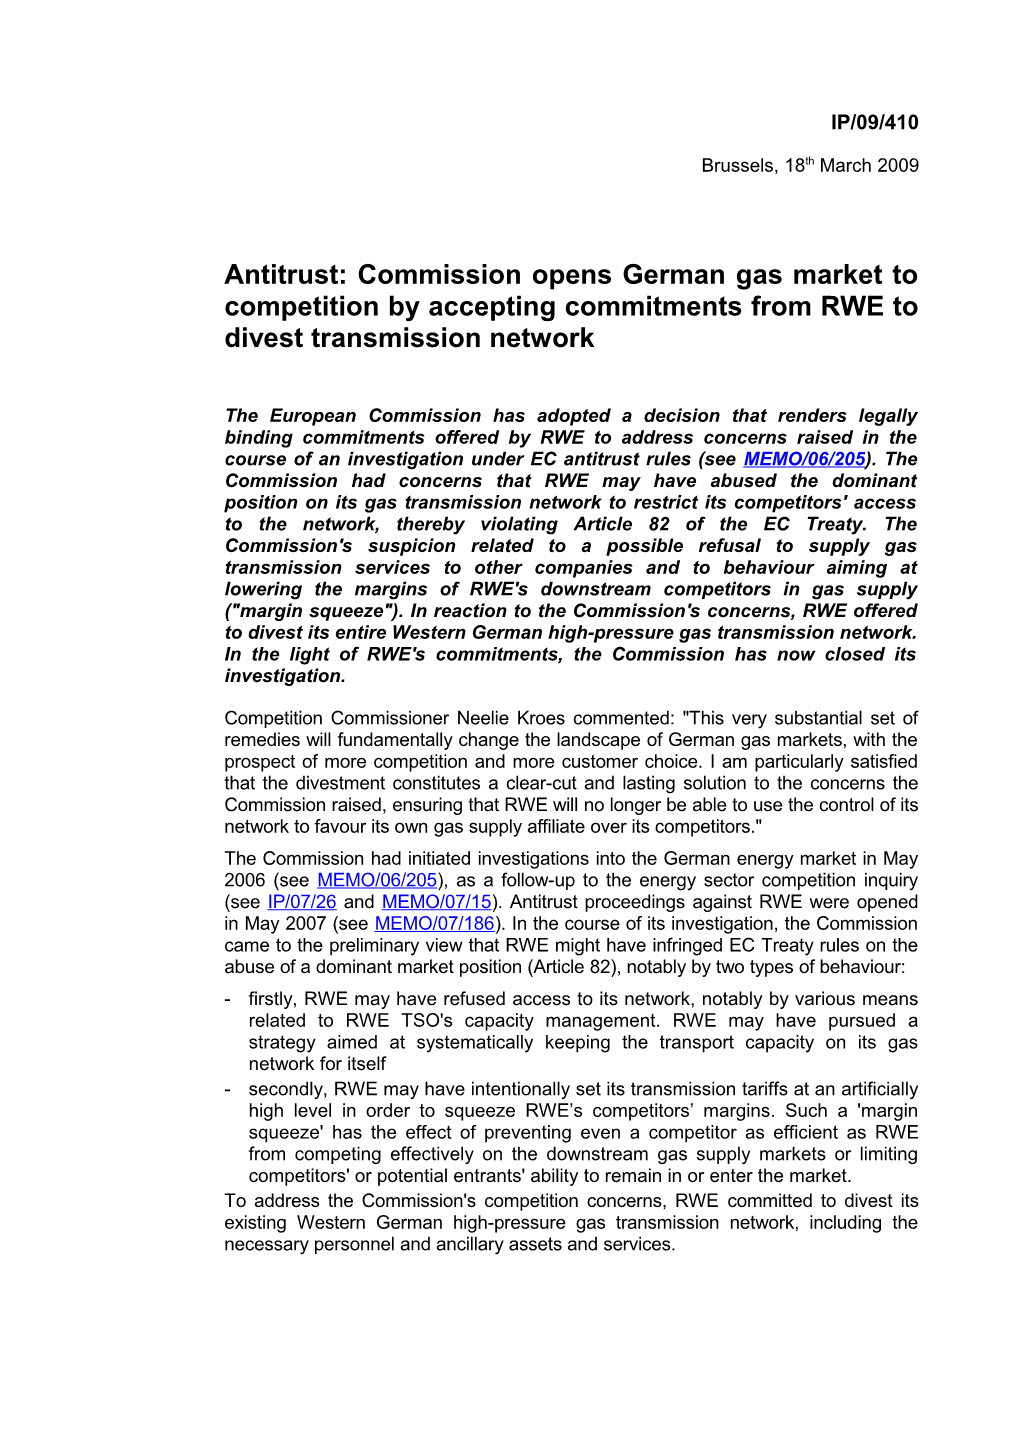 Antitrust: Commission Opens German Gas Market to Competition by Accepting Commitments